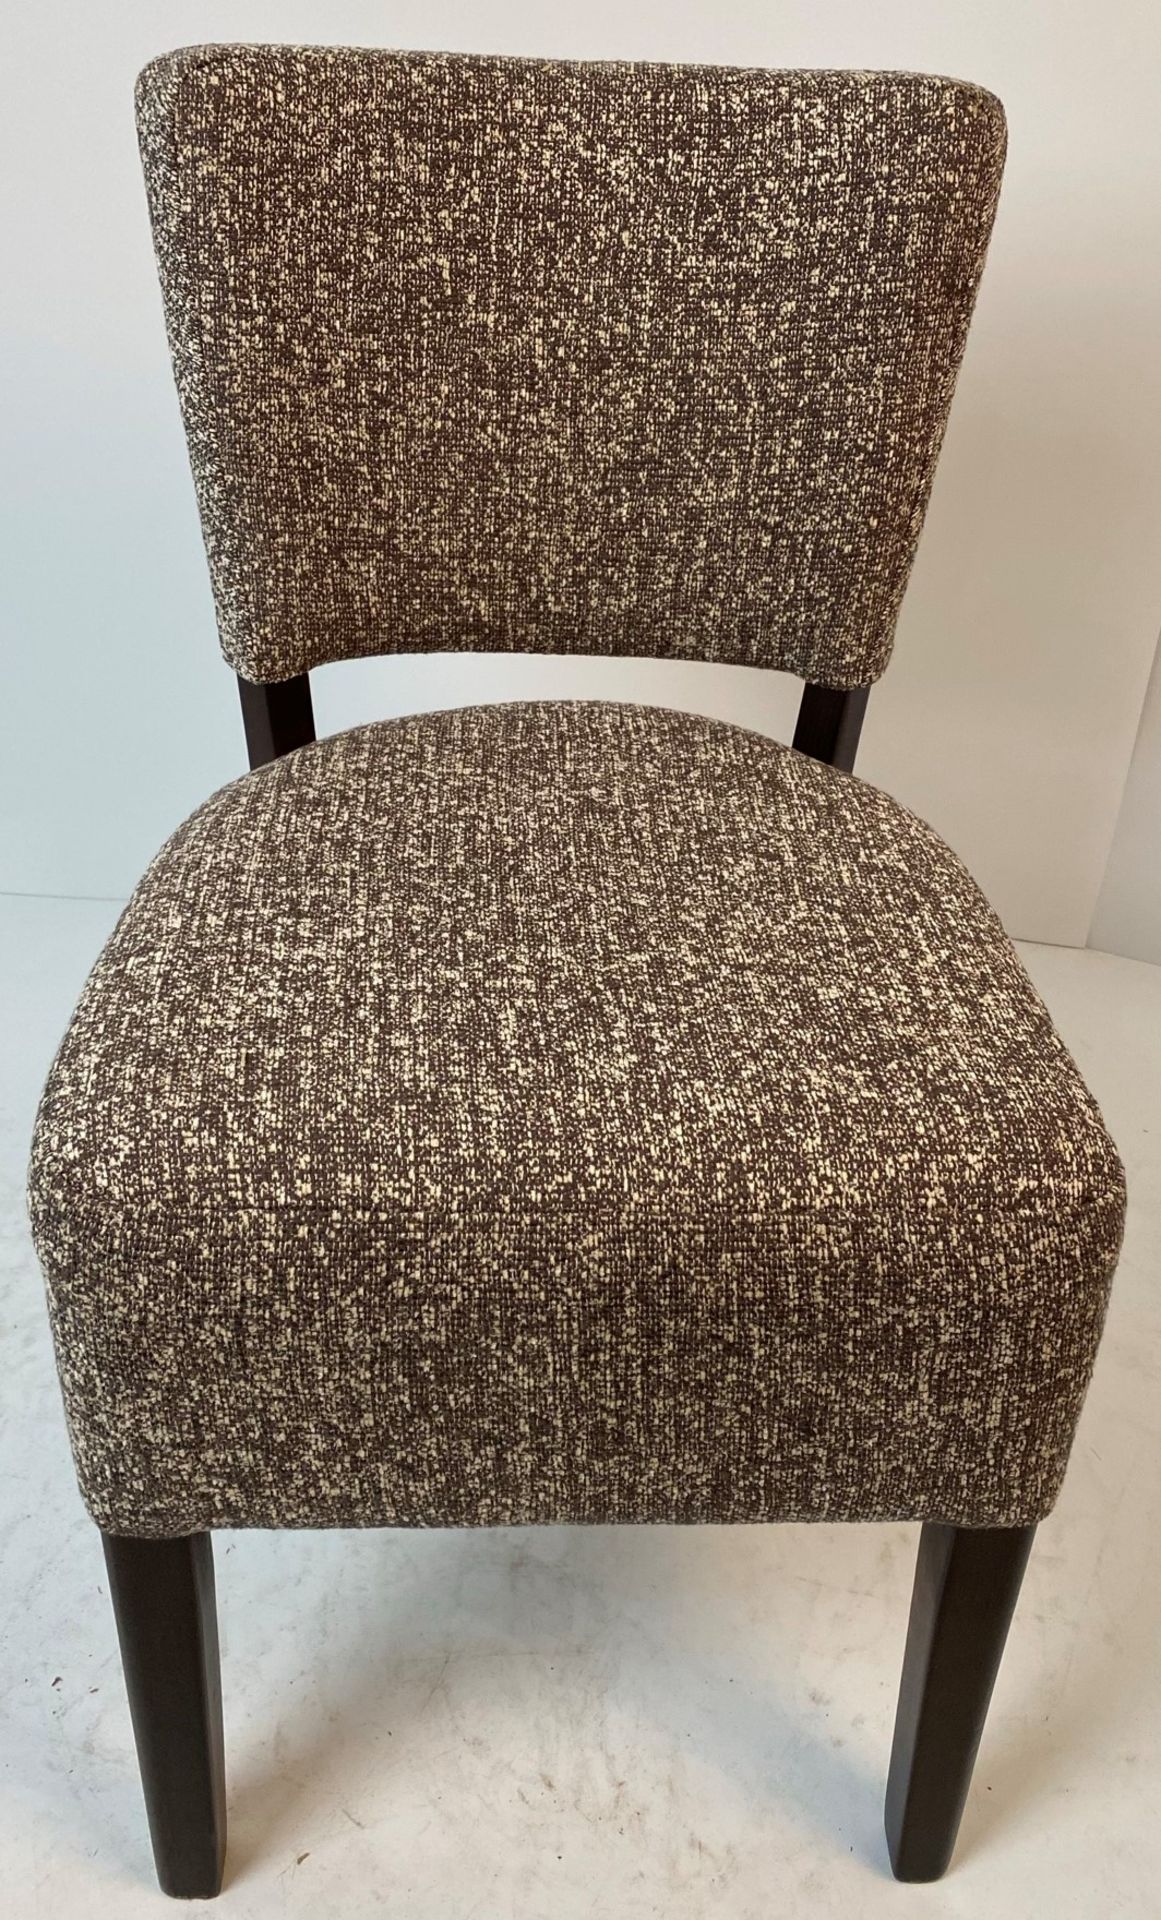 A Memphis Harlequin Speckle Truffle 131864 side/dining chair with walnut coloured frame